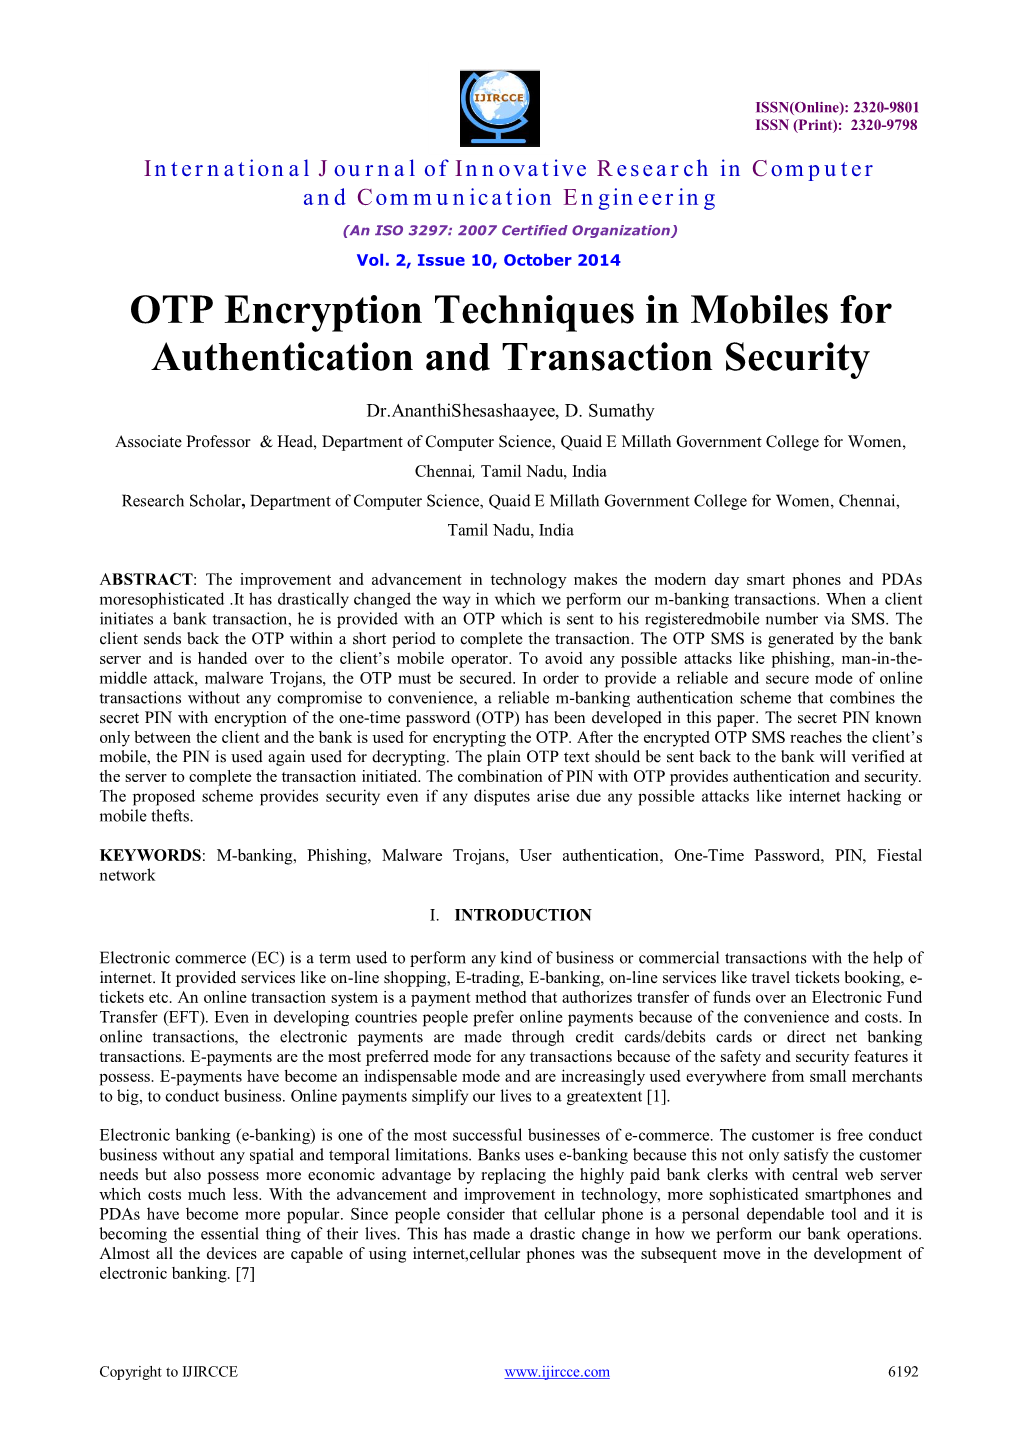 OTP Encryption Techniques in Mobiles for Authentication and Transaction Security